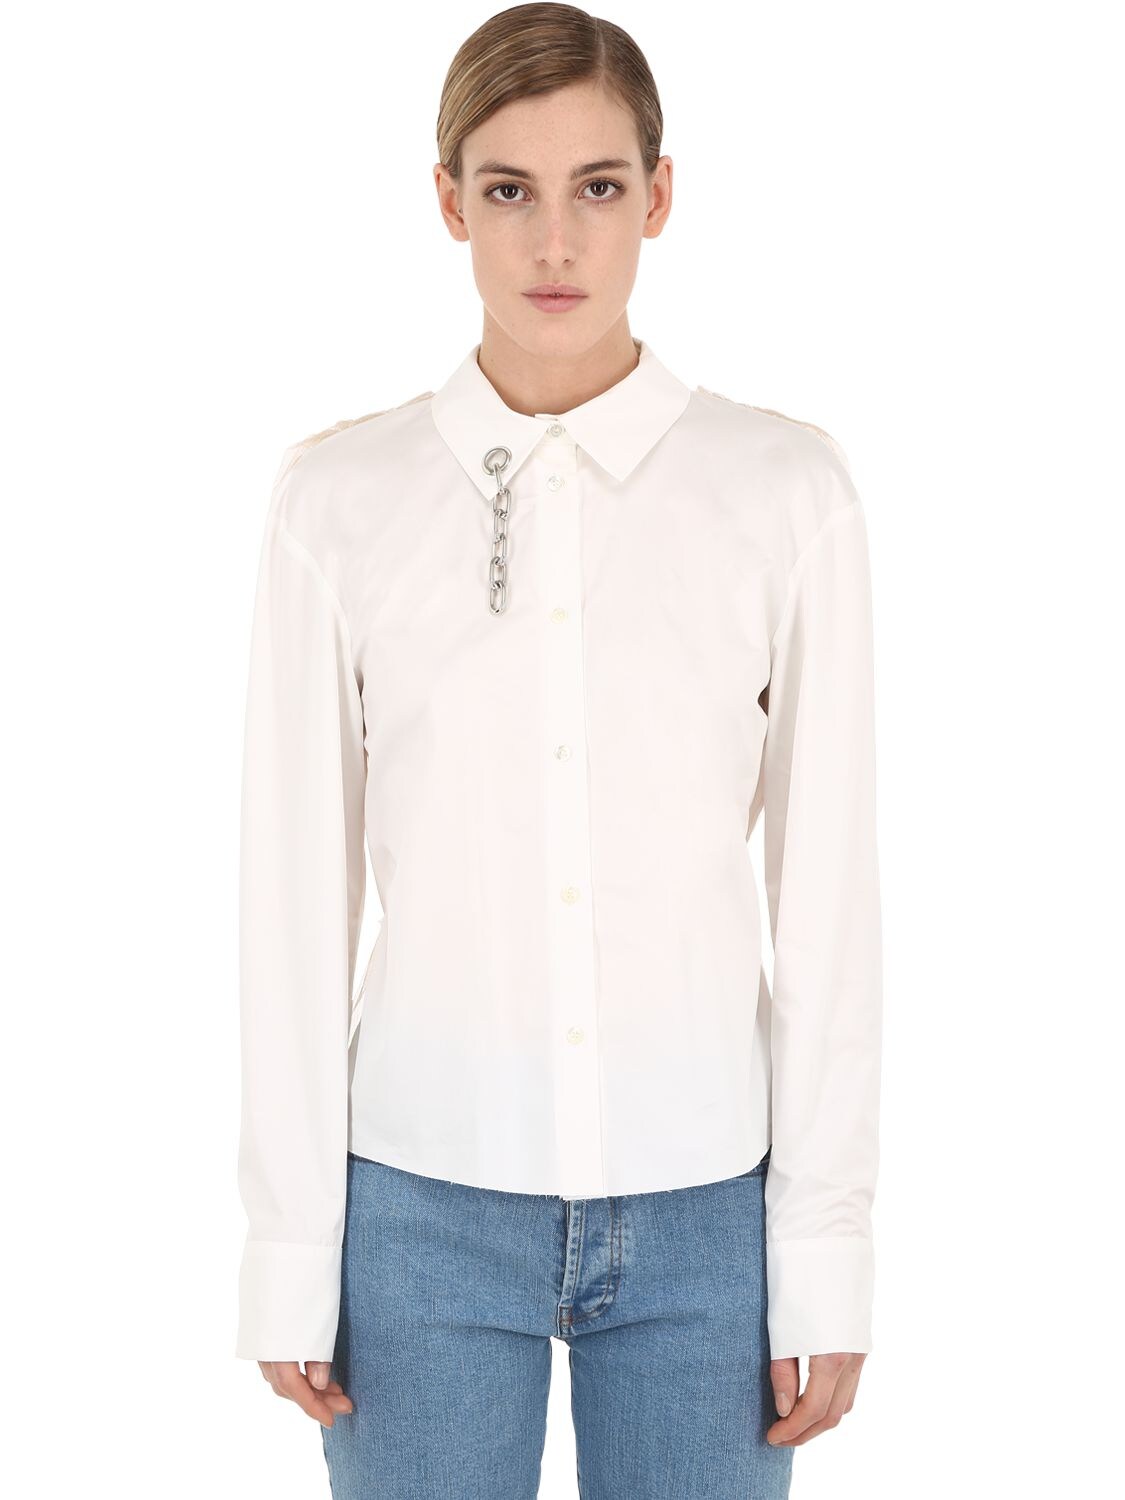 Act N°1 Cotton & Tulle Shirt W/ Chain Detail In White,beige